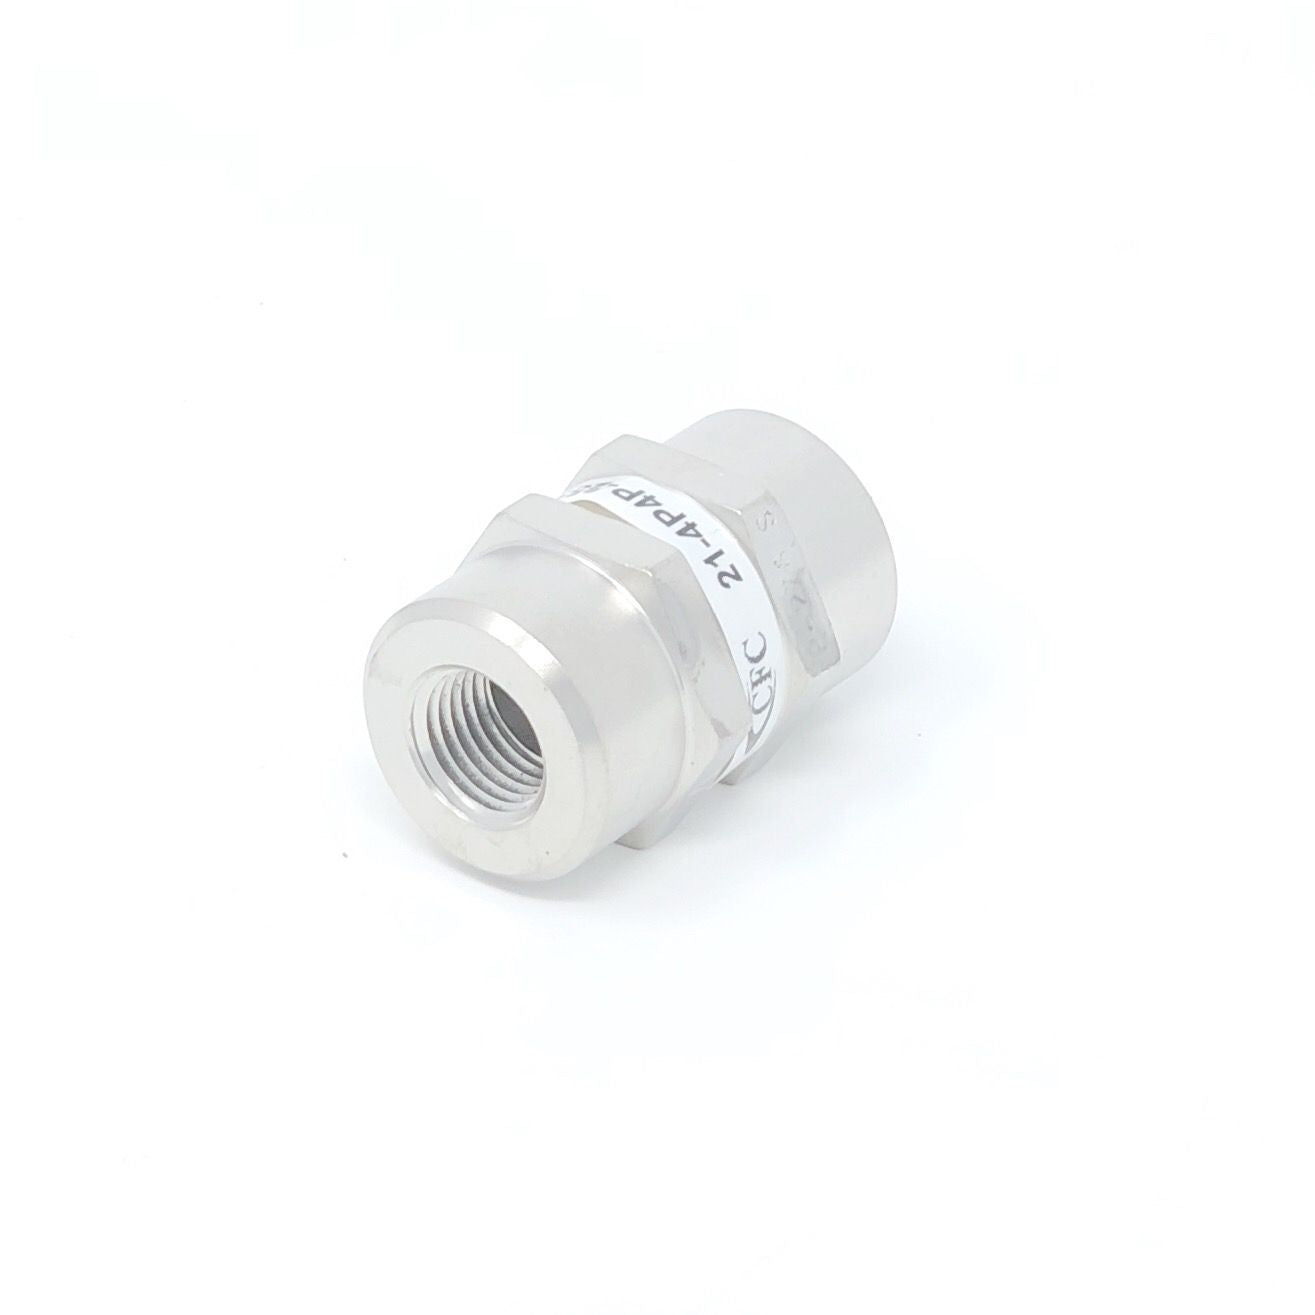 21-12T12T-18S : Chase High Pressure Inline Filter, 3000psi, 3/4" 37 Degree Flare , 18 Micron, No Visual Indicator, With Bypass